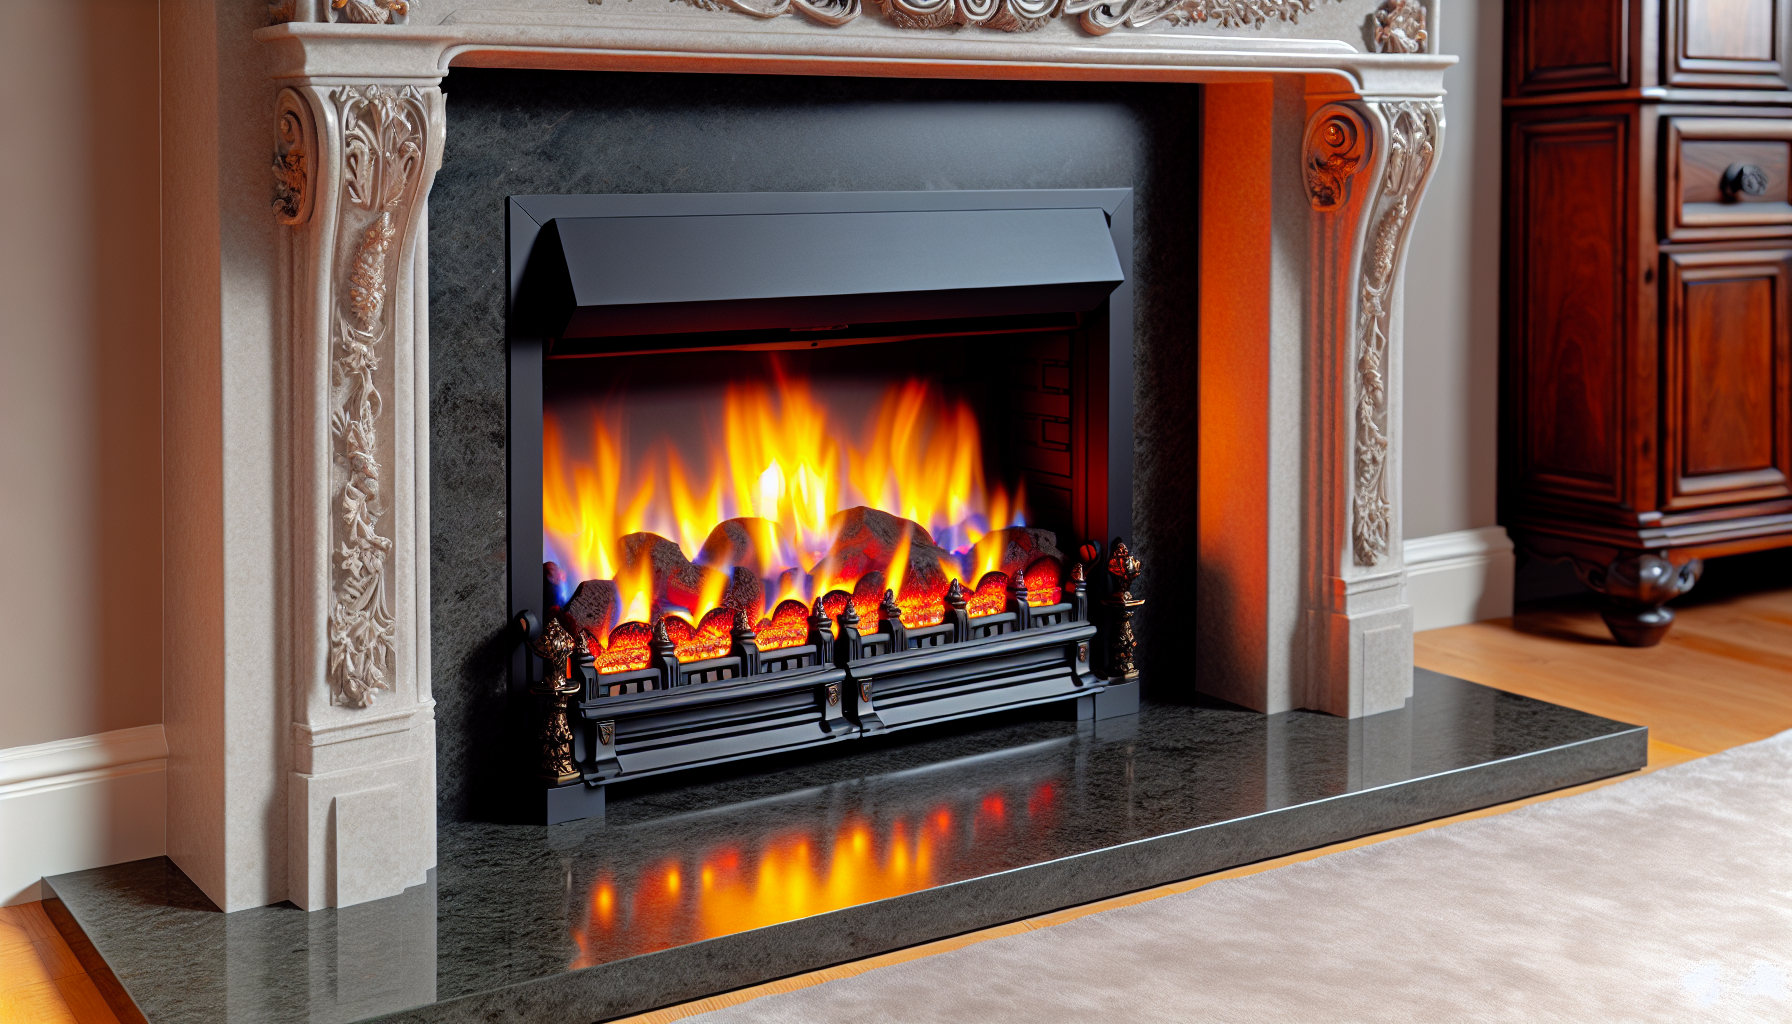 Regency gas fireplace with traditional design